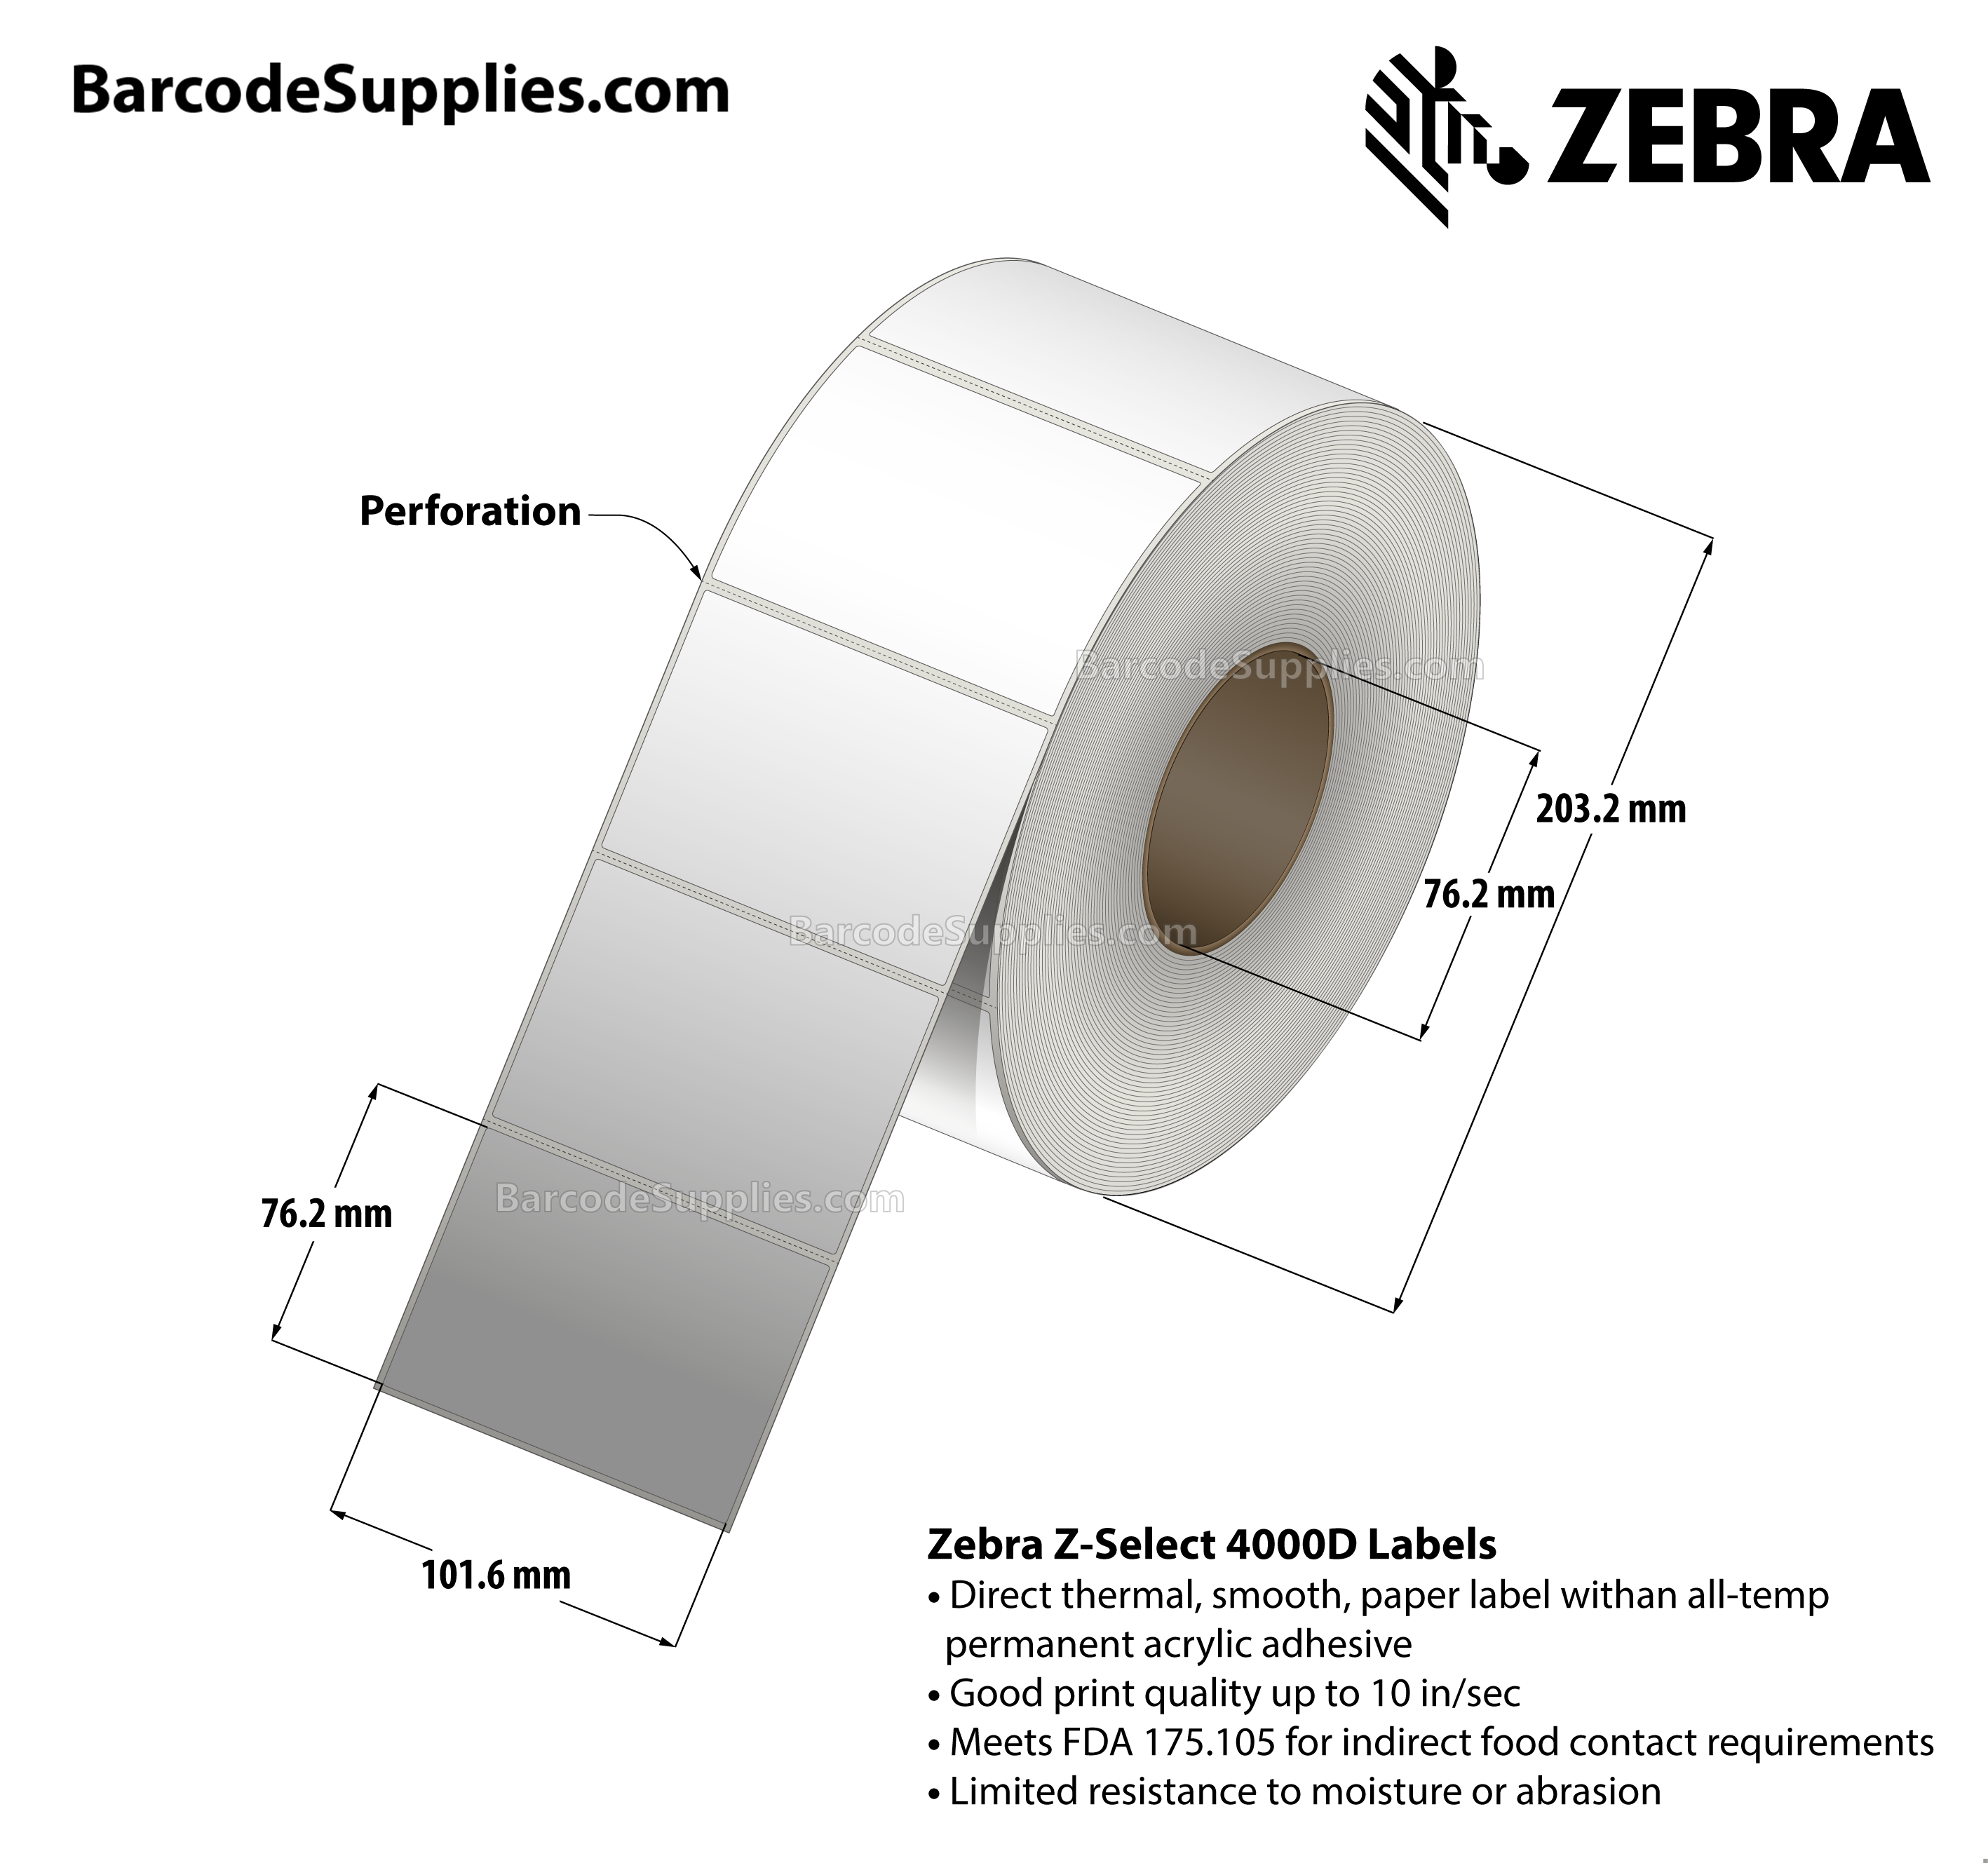 4 x 3 Direct Thermal White Z-Select 4000D Labels With All-Temp Adhesive - Perforated - 2238 Labels Per Roll - Carton Of 4 Rolls - 8952 Labels Total - MPN: 800740-305